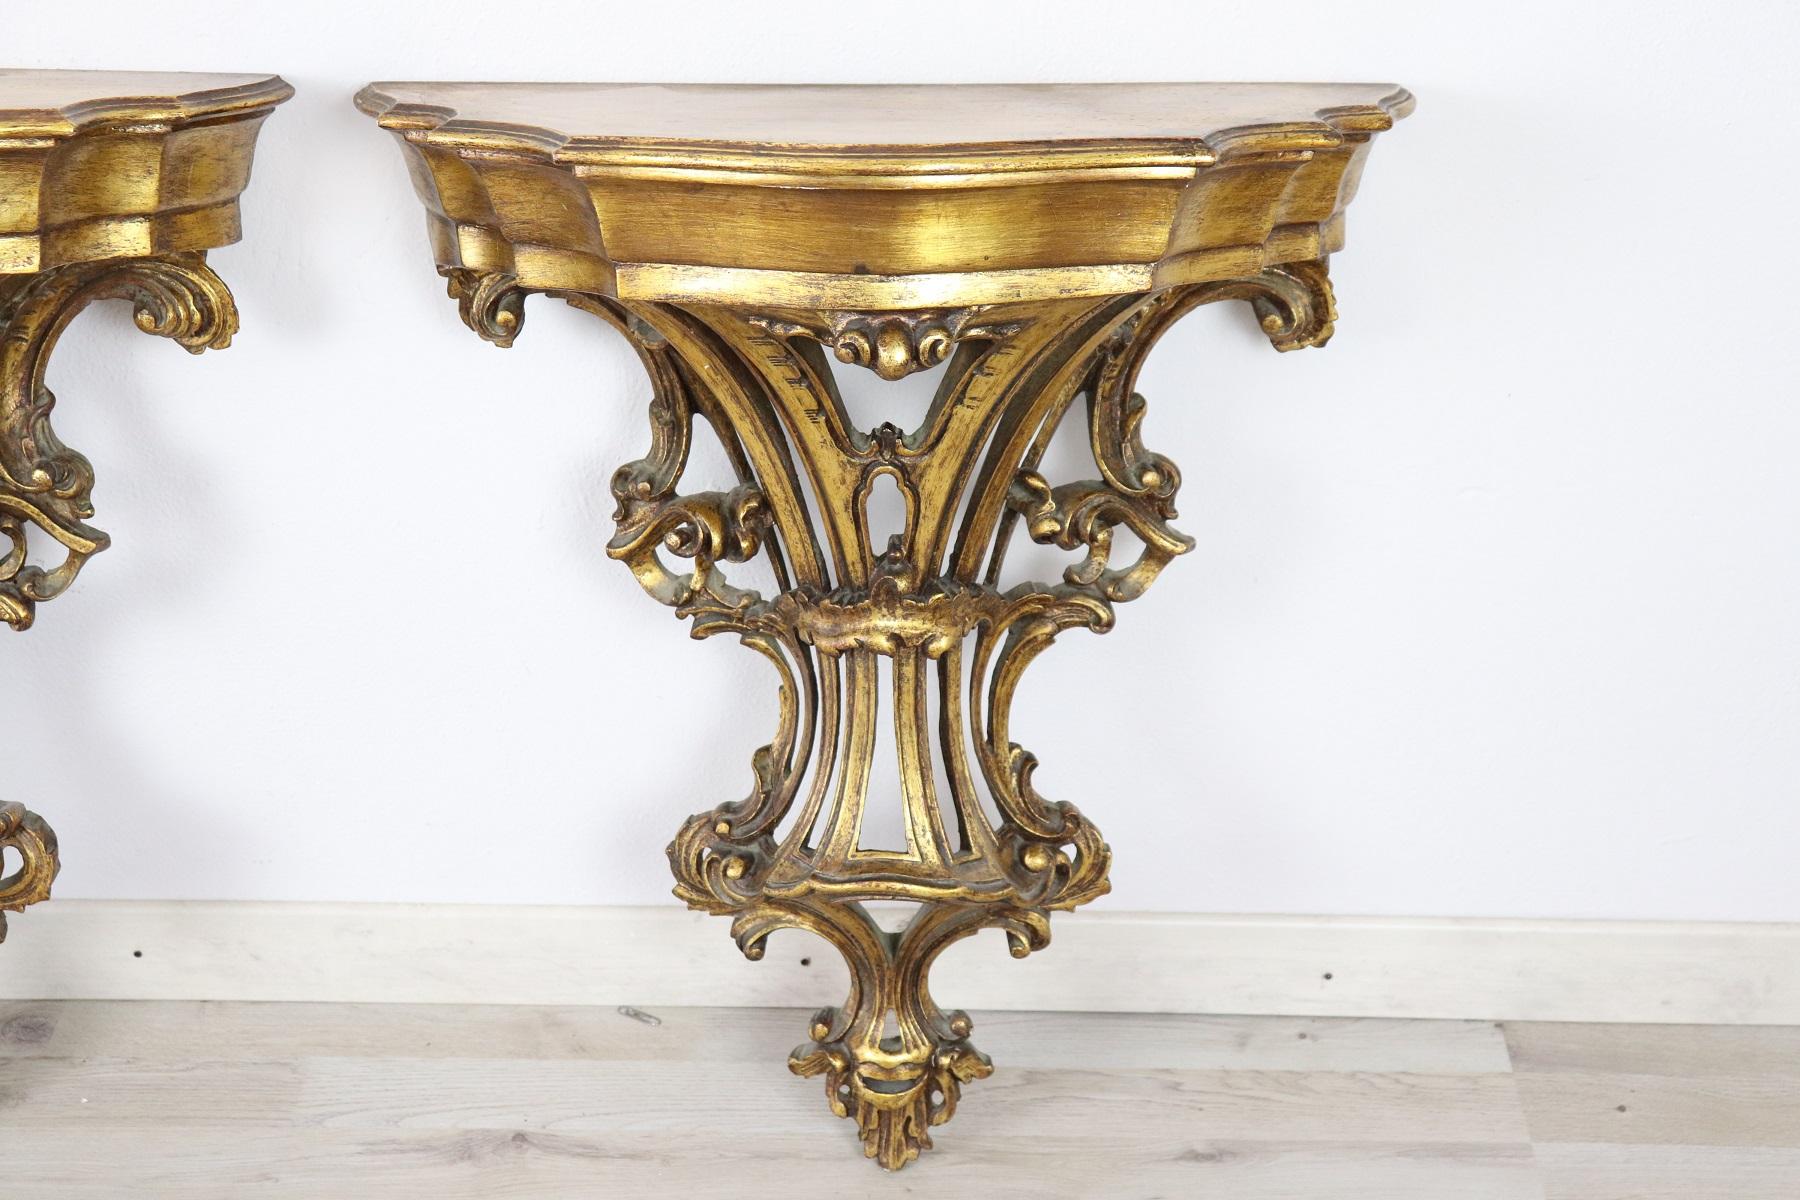 Italian Baroque style pair of nightstands. Rich carved and gilded wood they must be fixed to the wall. Great woodwork with lots of curls and swirls of typical Italian Baroque taste. The nightstands have a convenient drawer. On request we also have